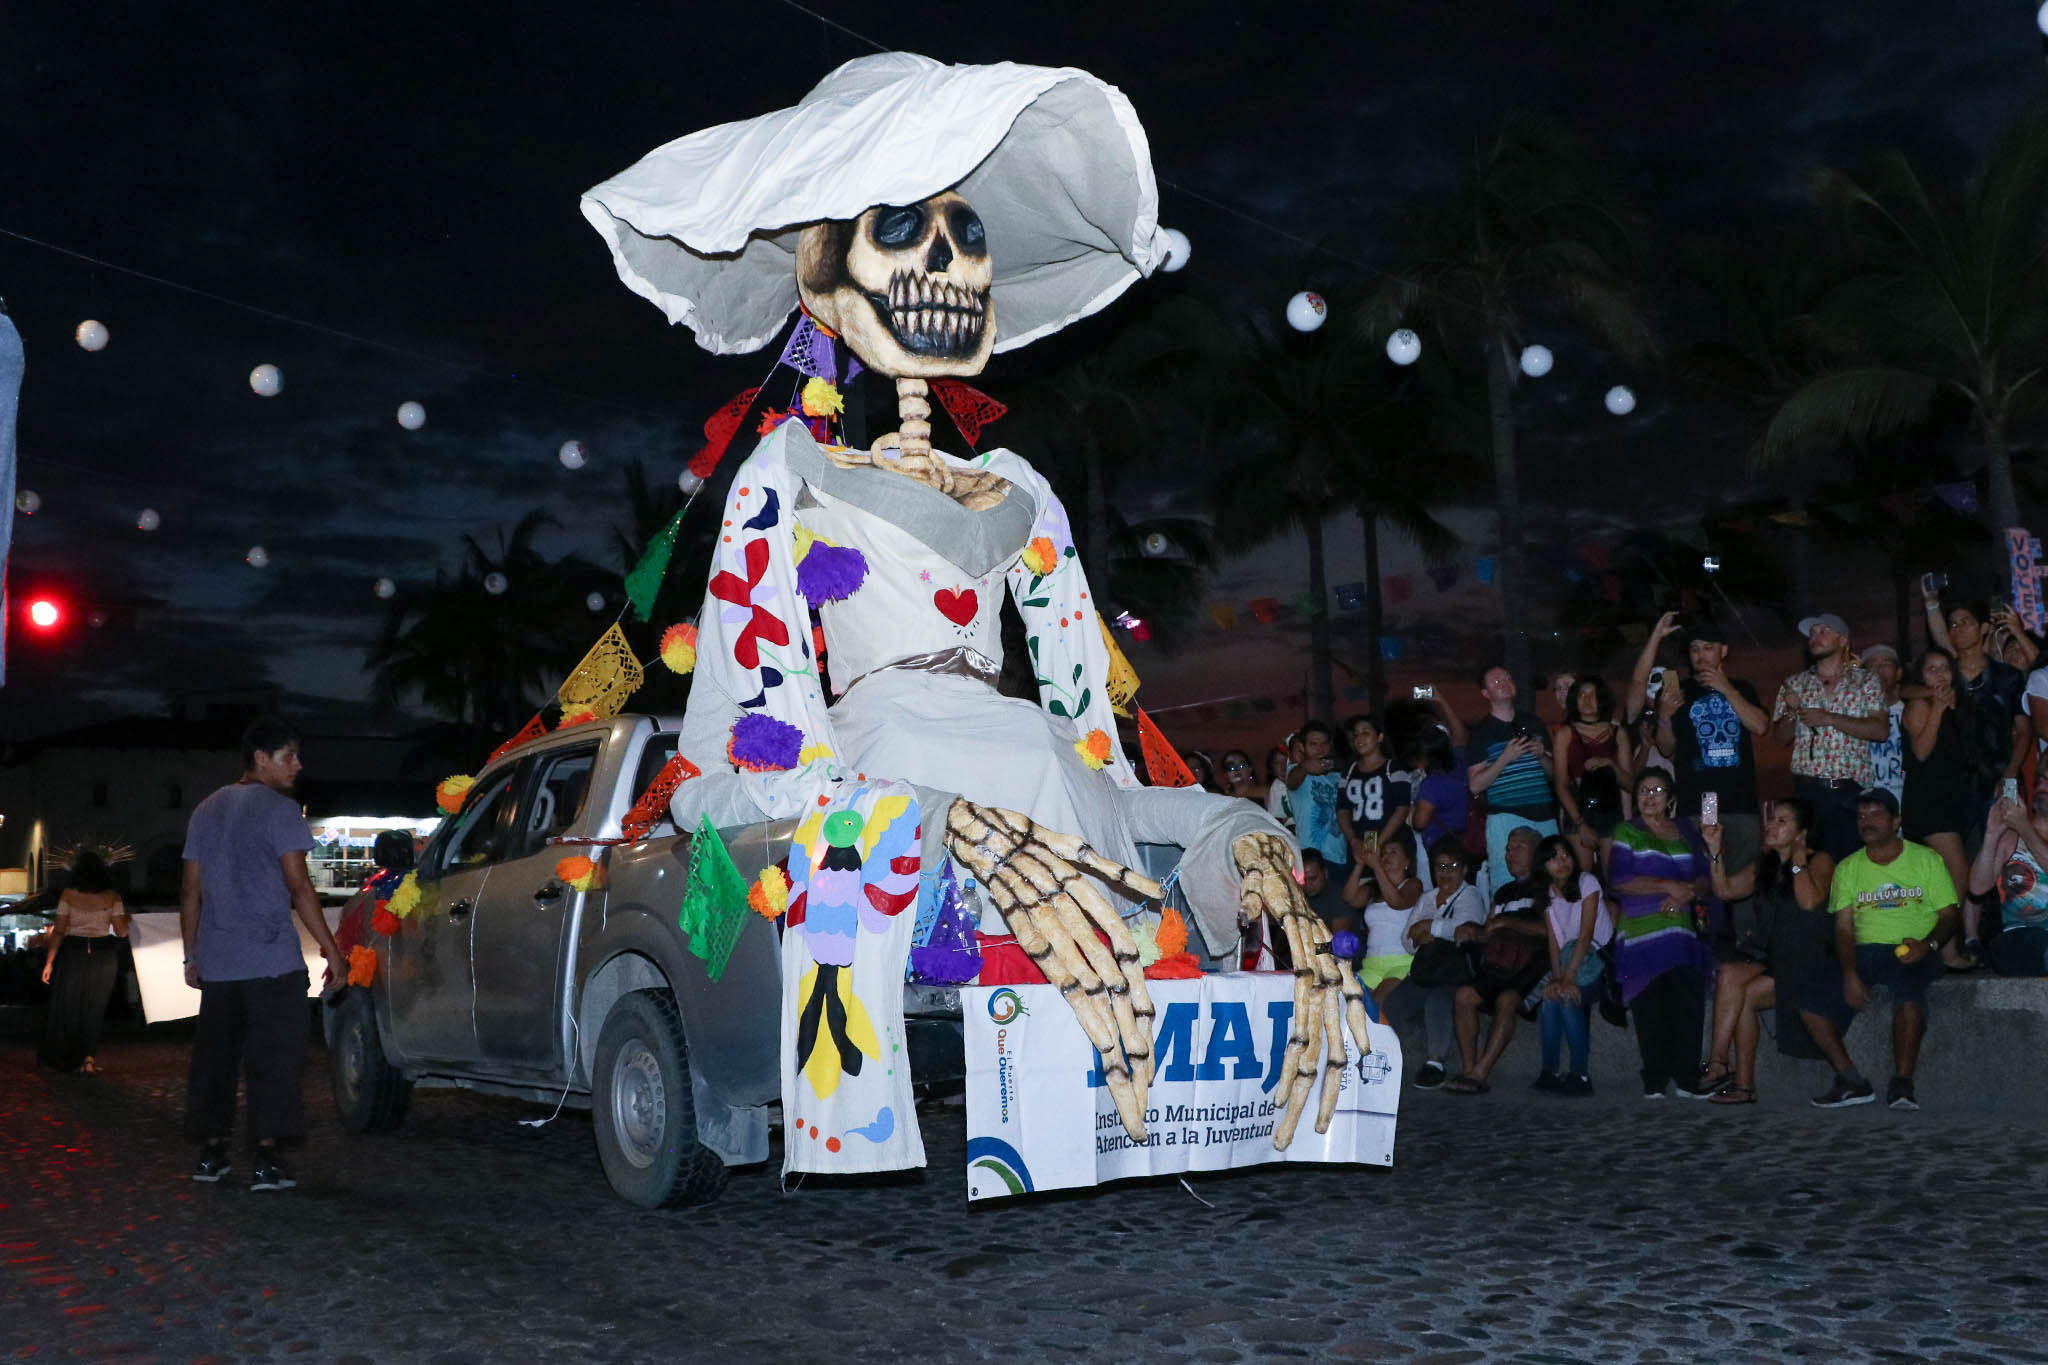 Thousands enjoyed Day of the Dead Parade in Puerto Vallarta